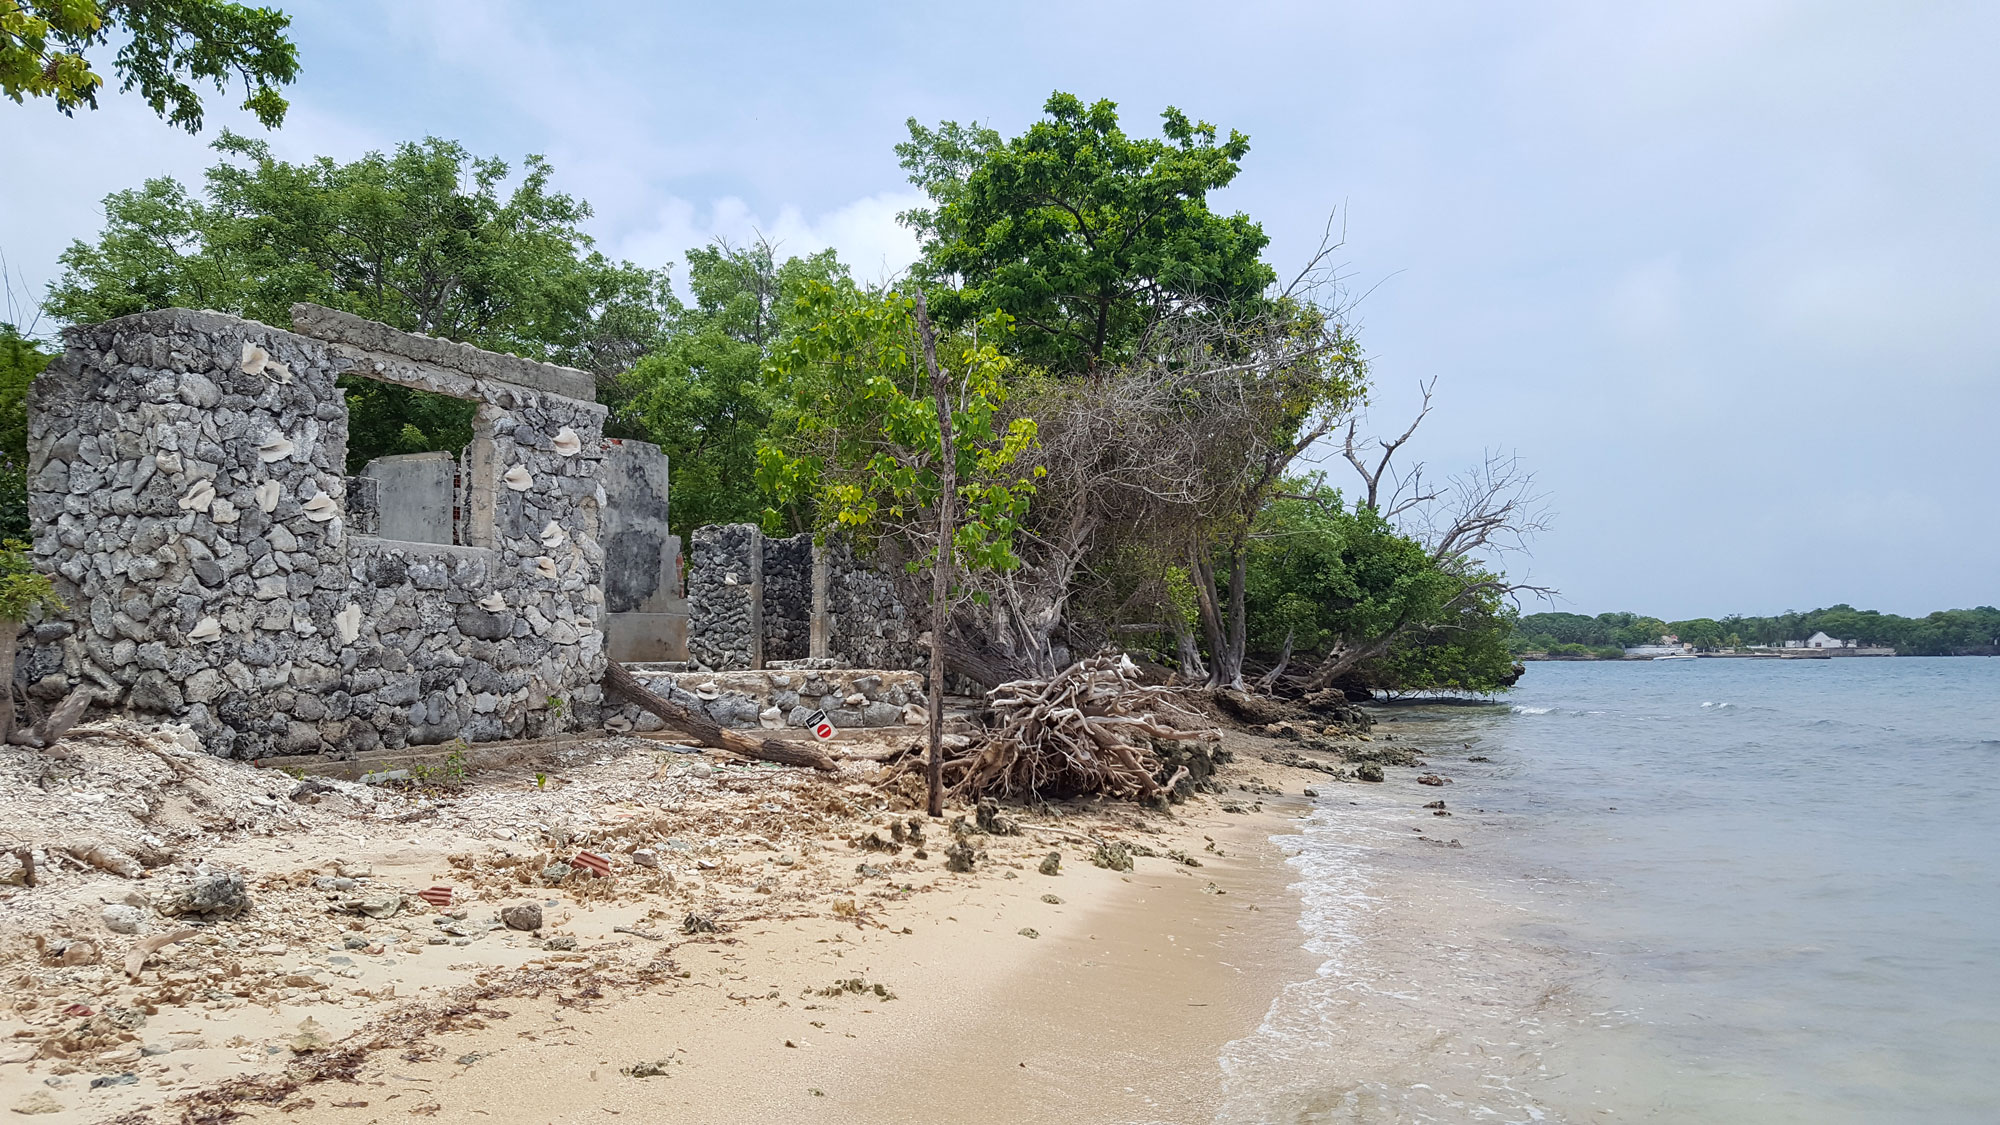 remnants of a building on the opposite side of the island